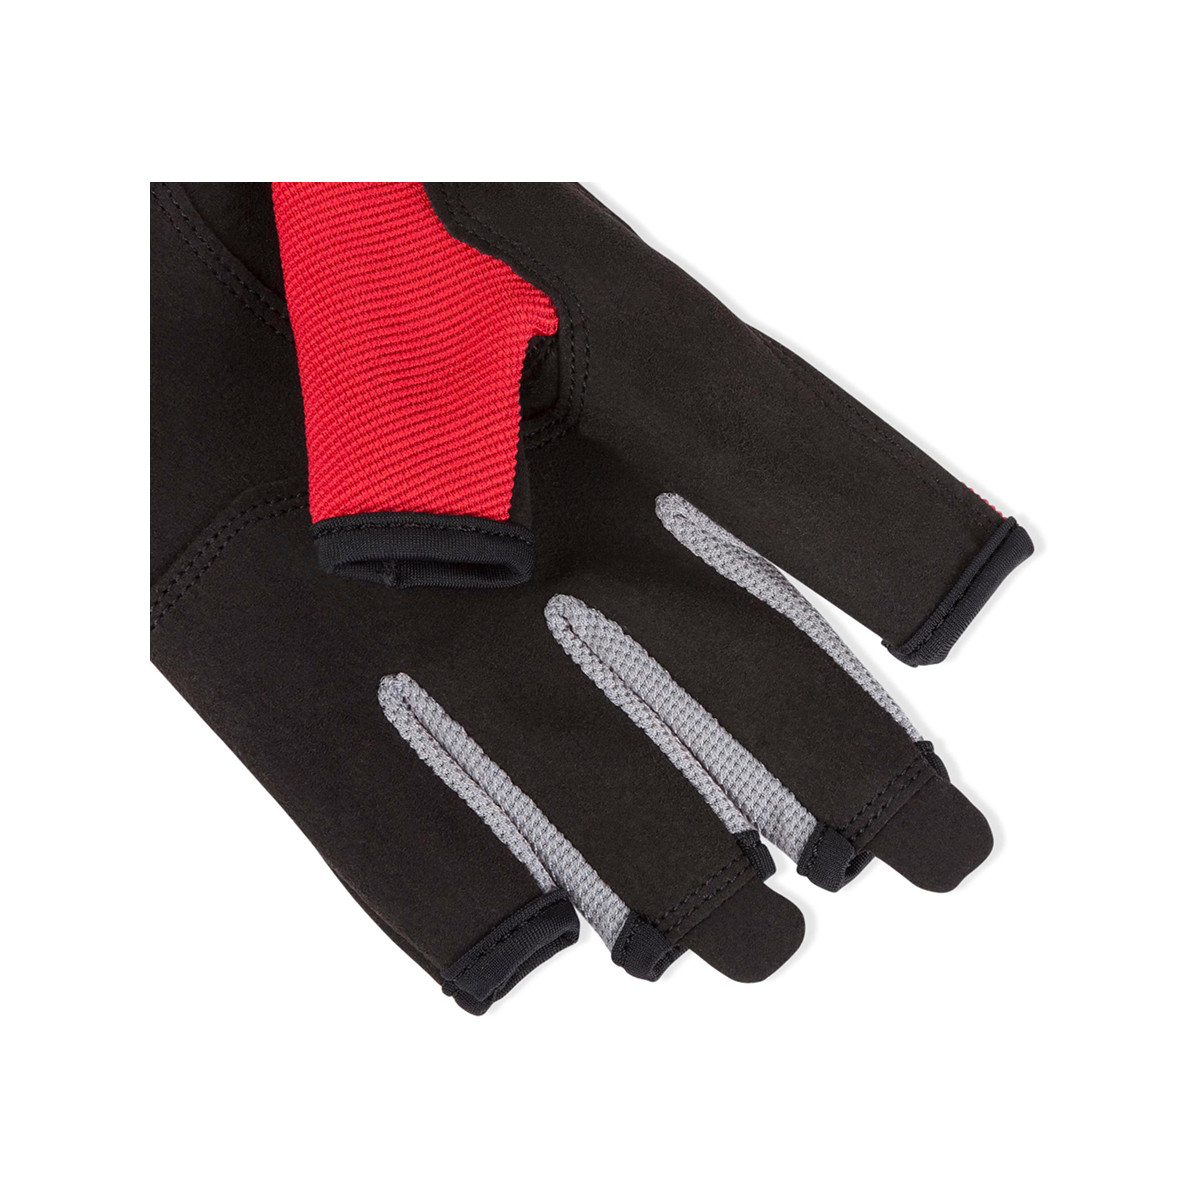 Musto Essential gants de voile doigts courts rouge, taille S